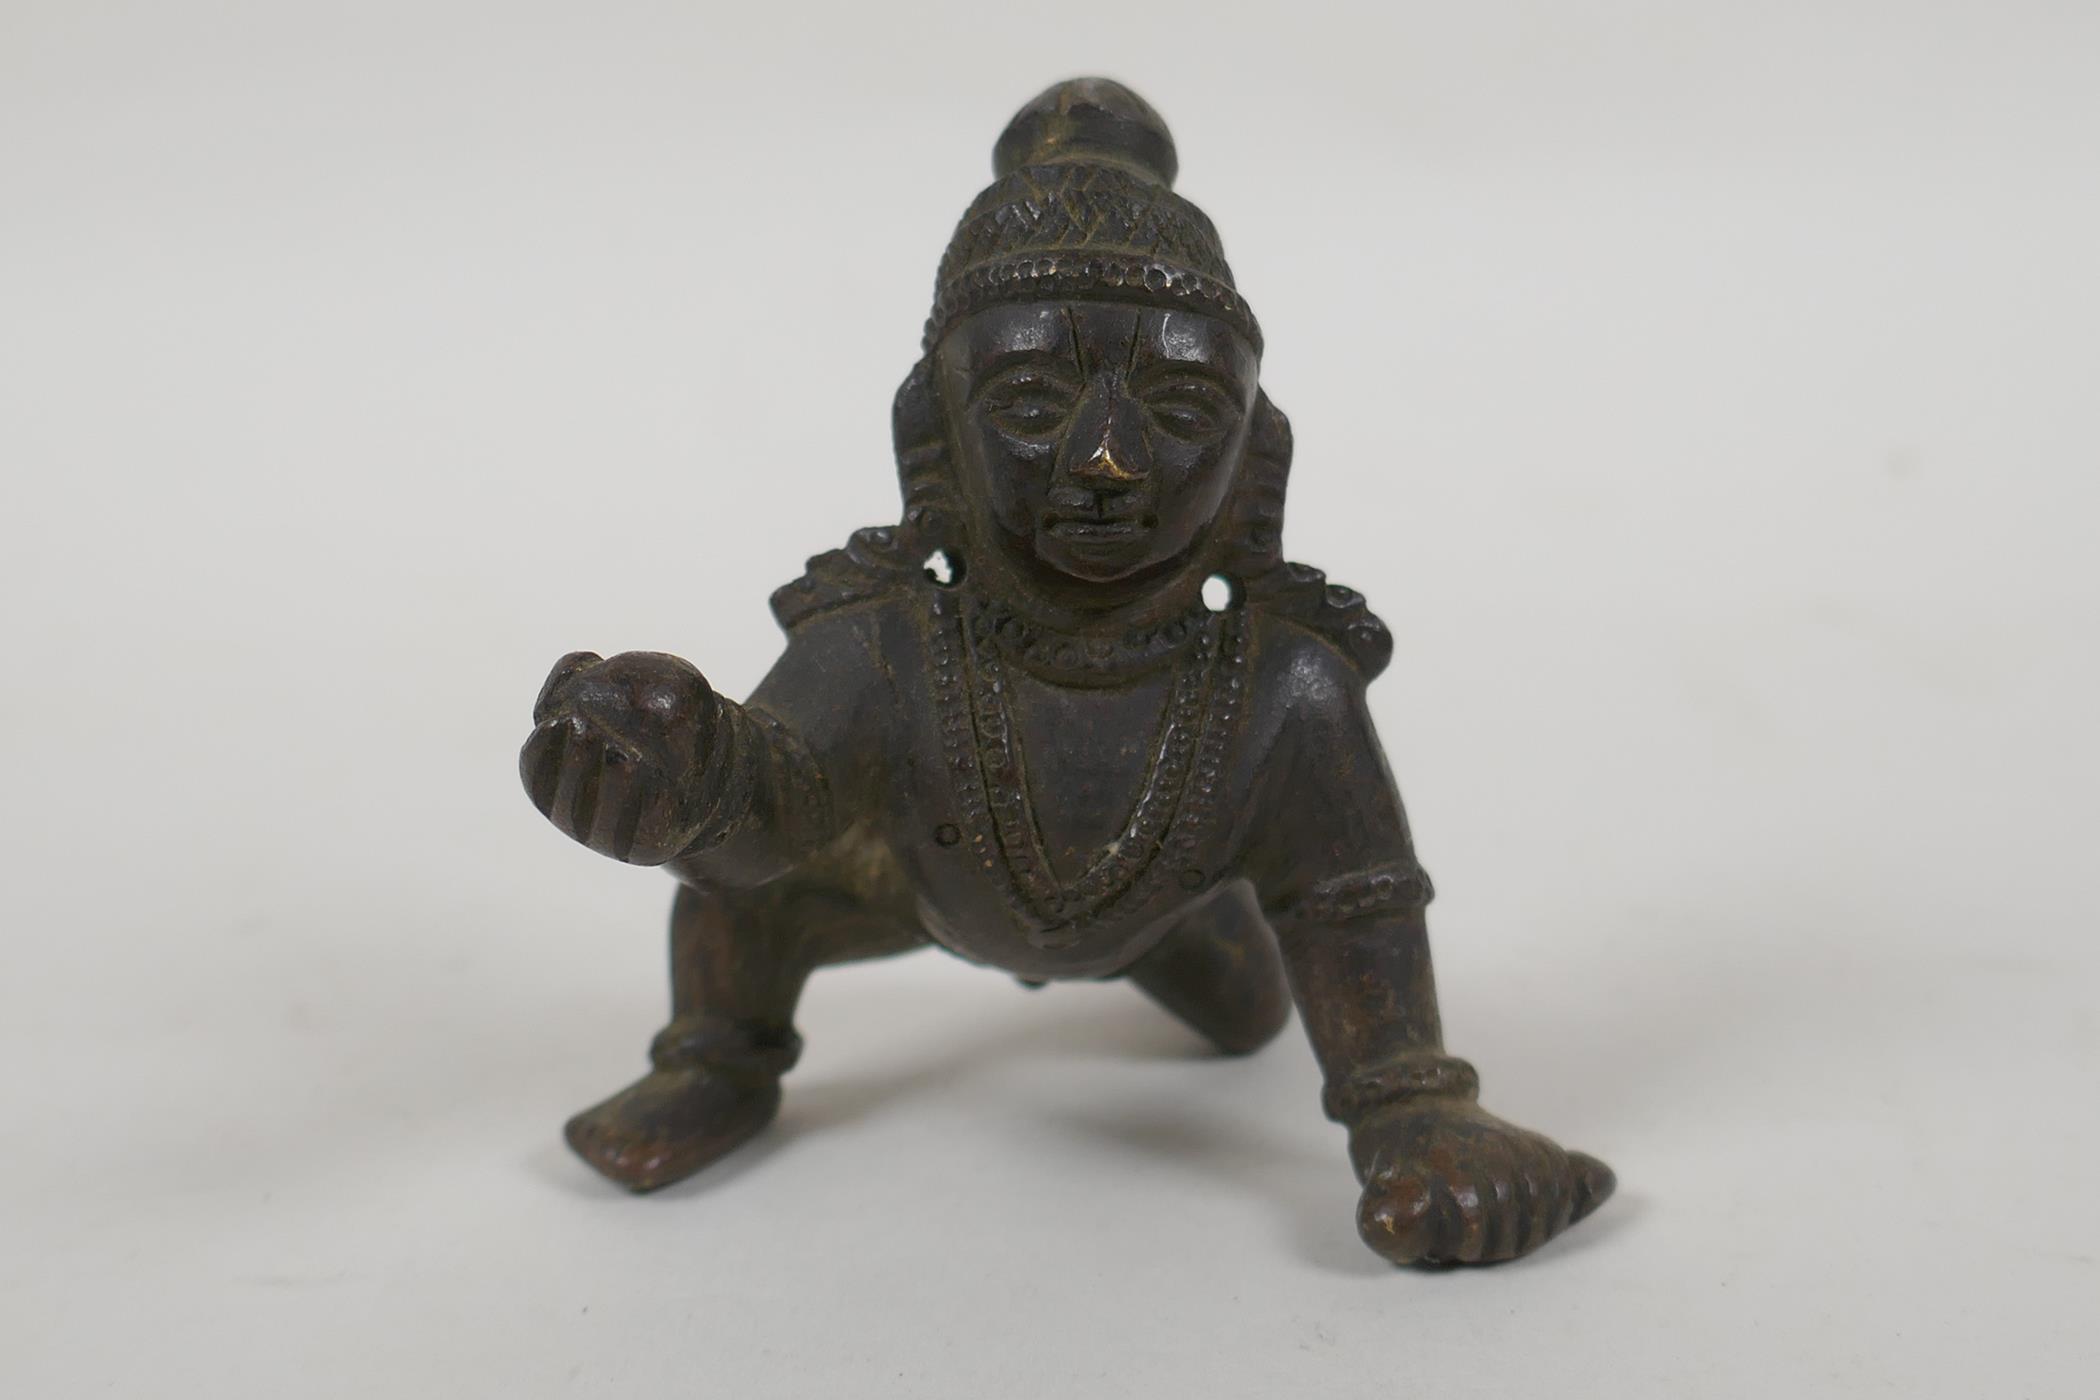 An antique Indian bronze of a crawling figure, 8cm long - Image 2 of 3